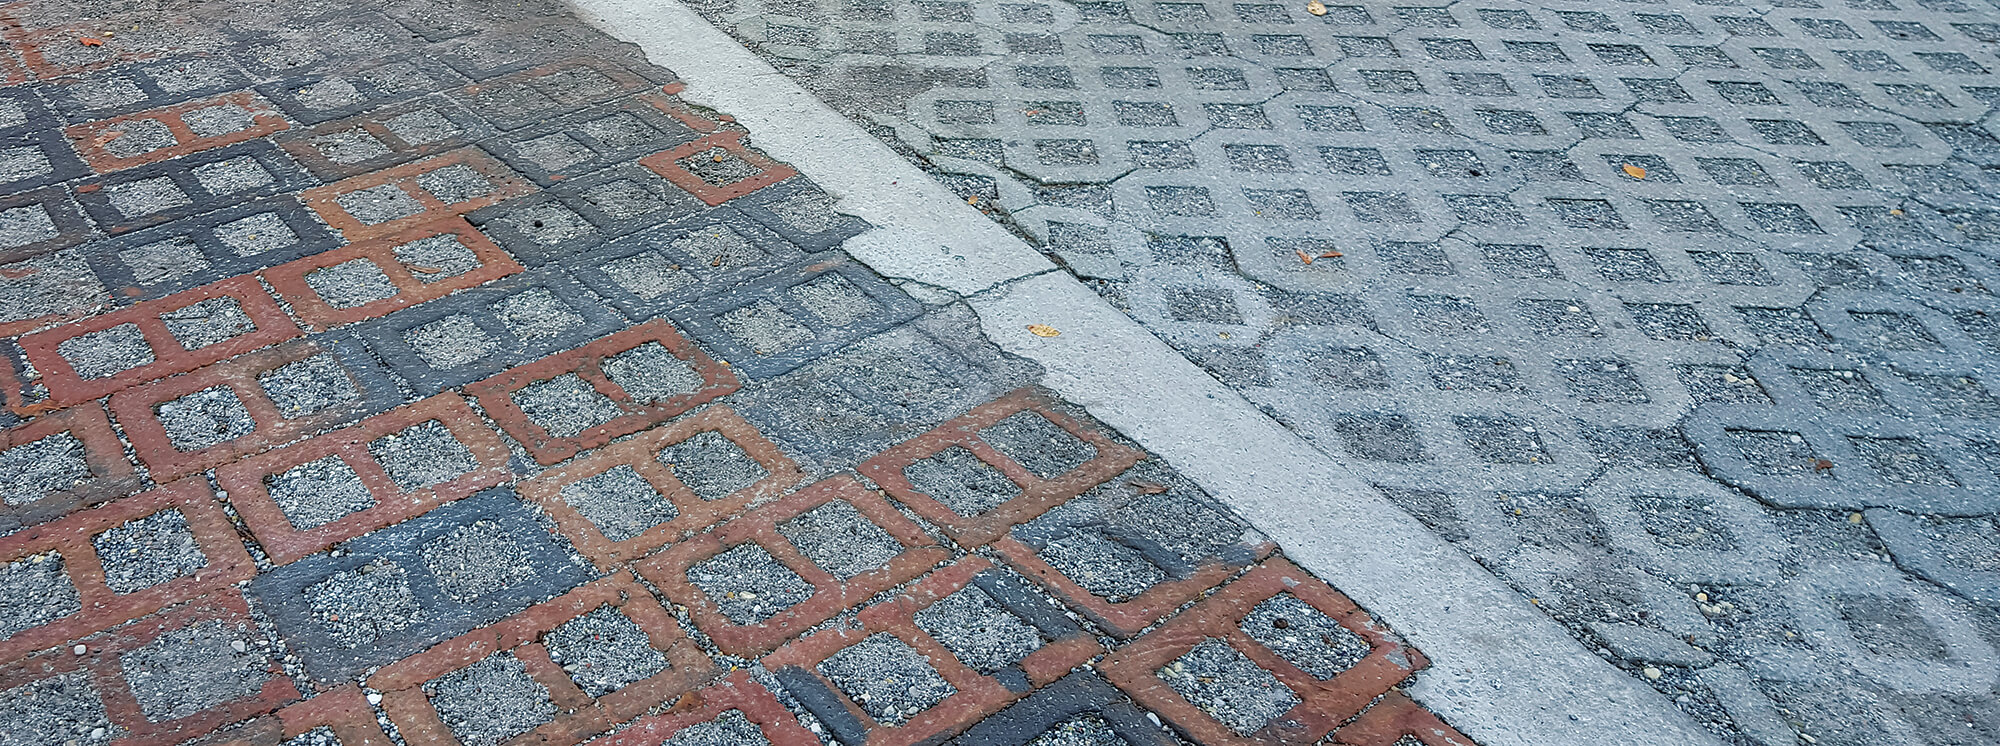 pavement blocks filled with aggregate to form a driveway